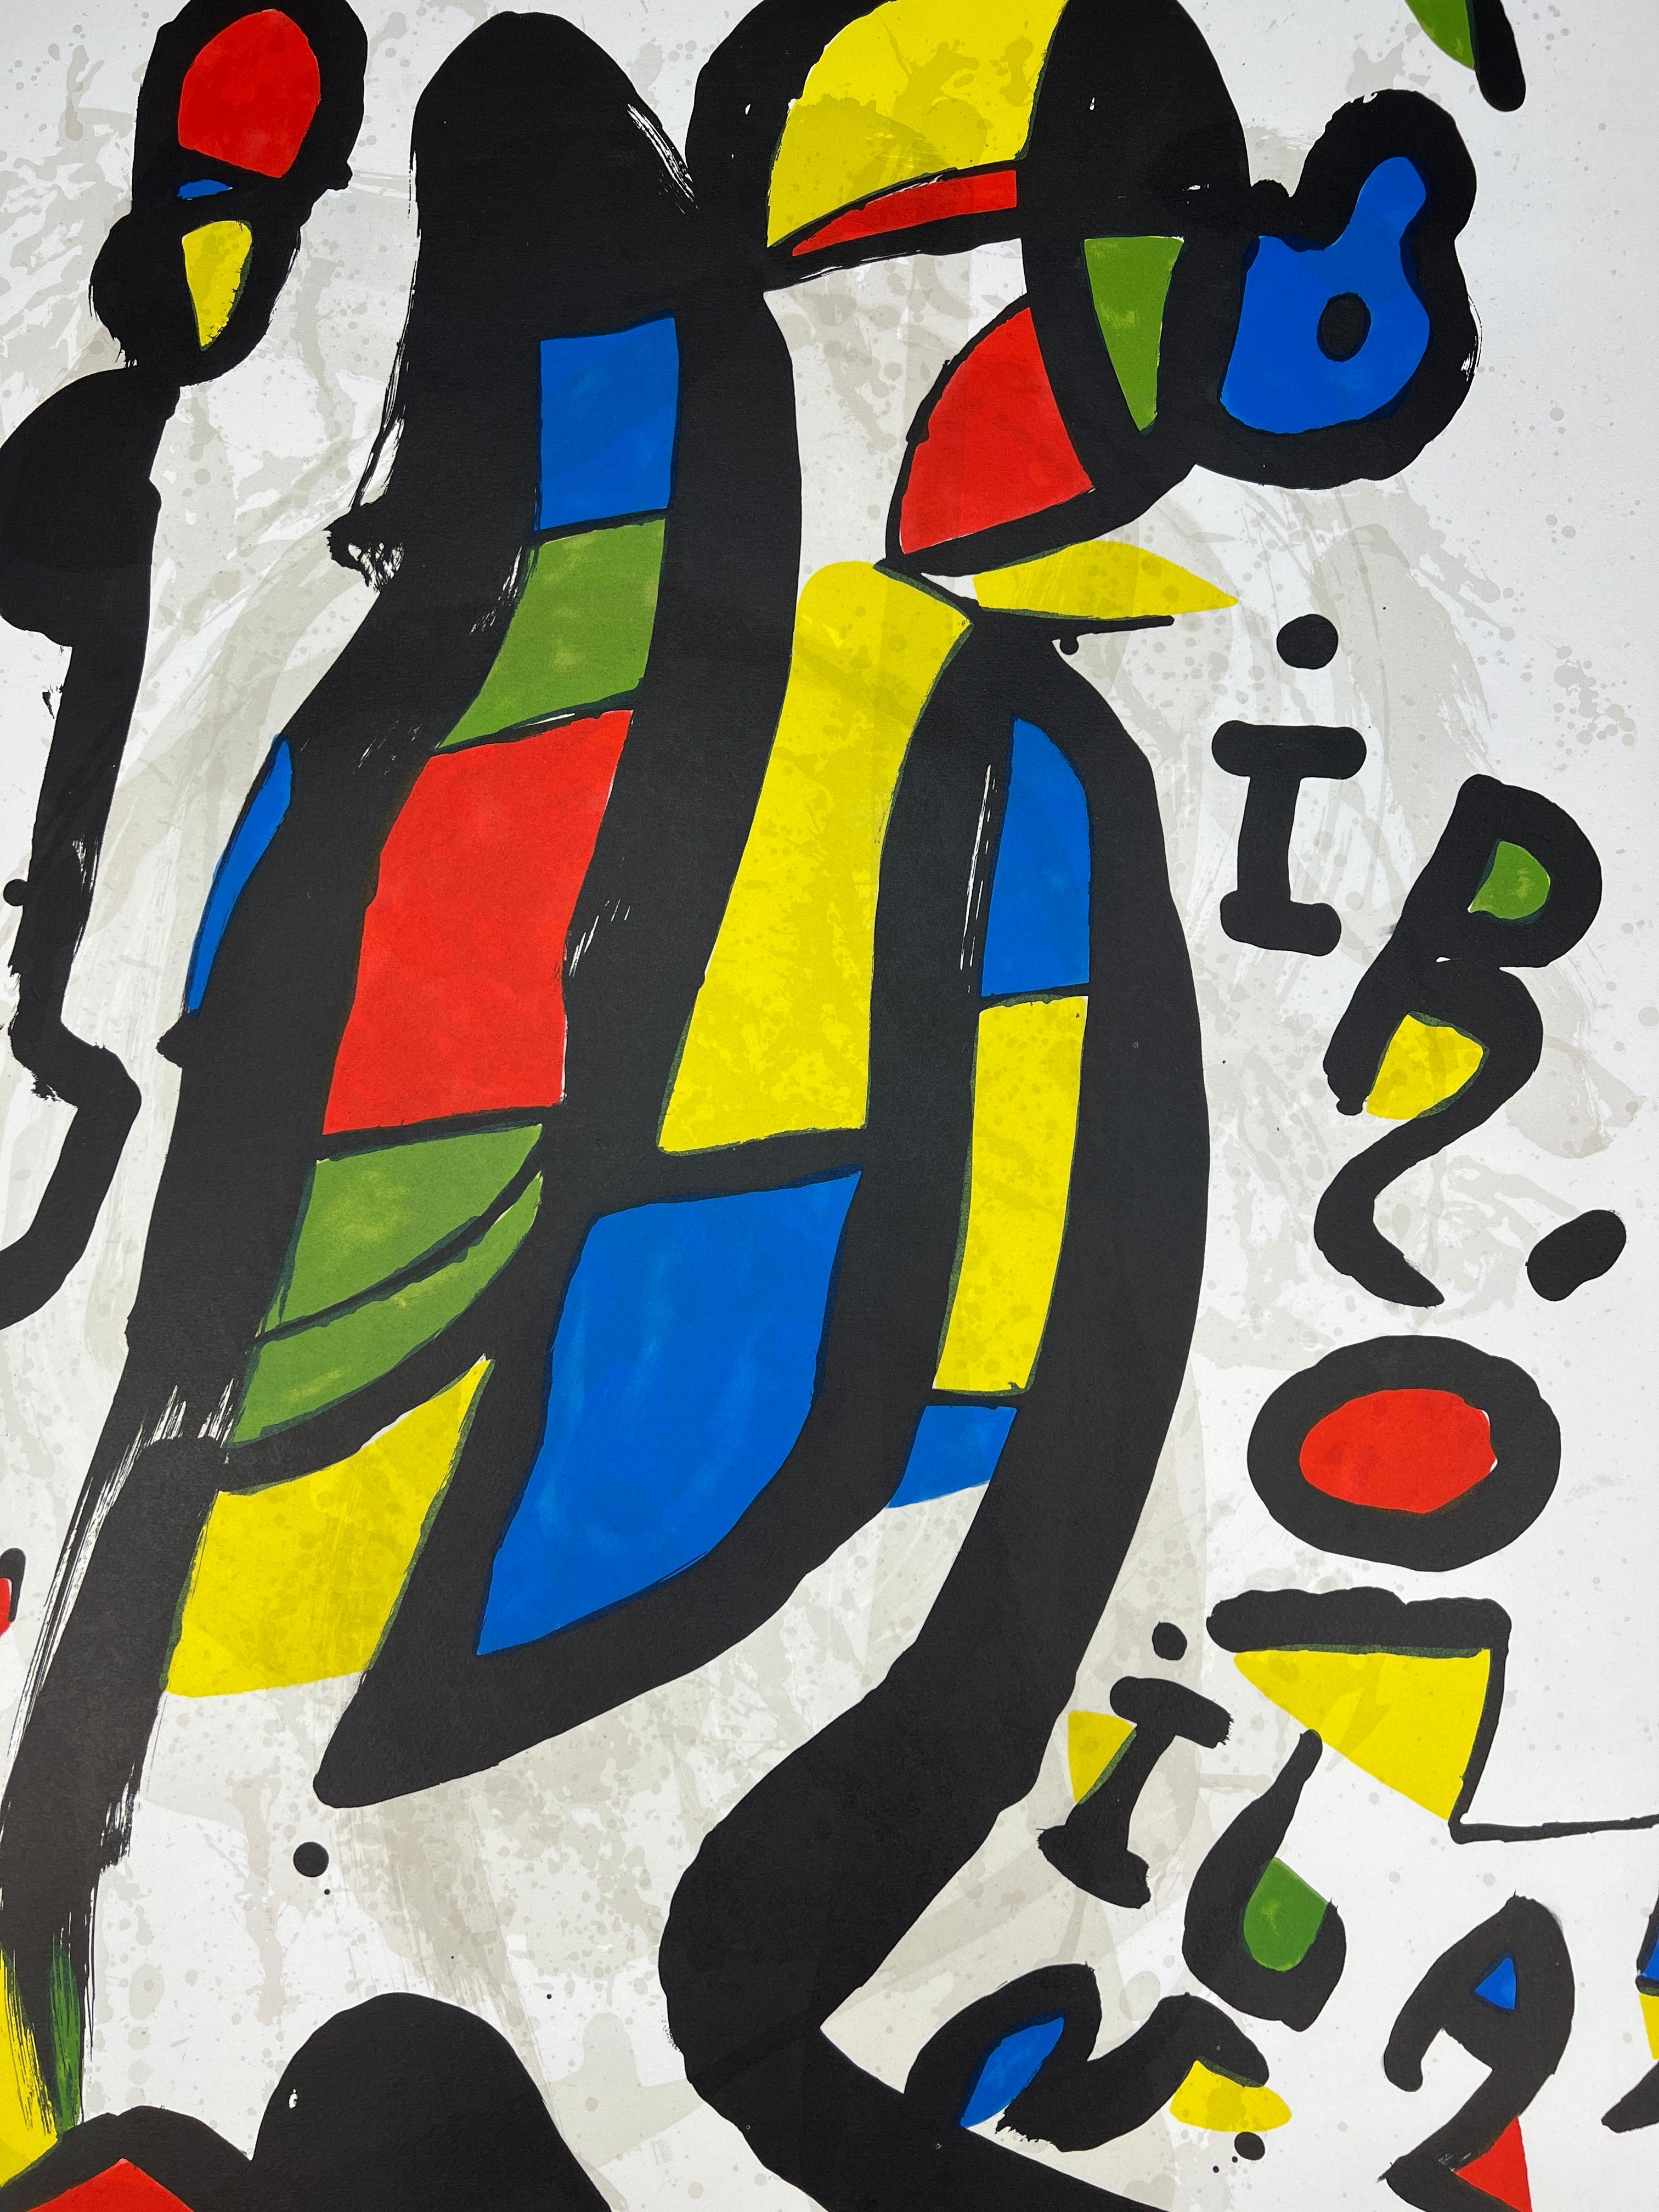 Joan Miró - Miró Milano - hand-signed Lithograph on Arches paper - 43/75 - 1981 1